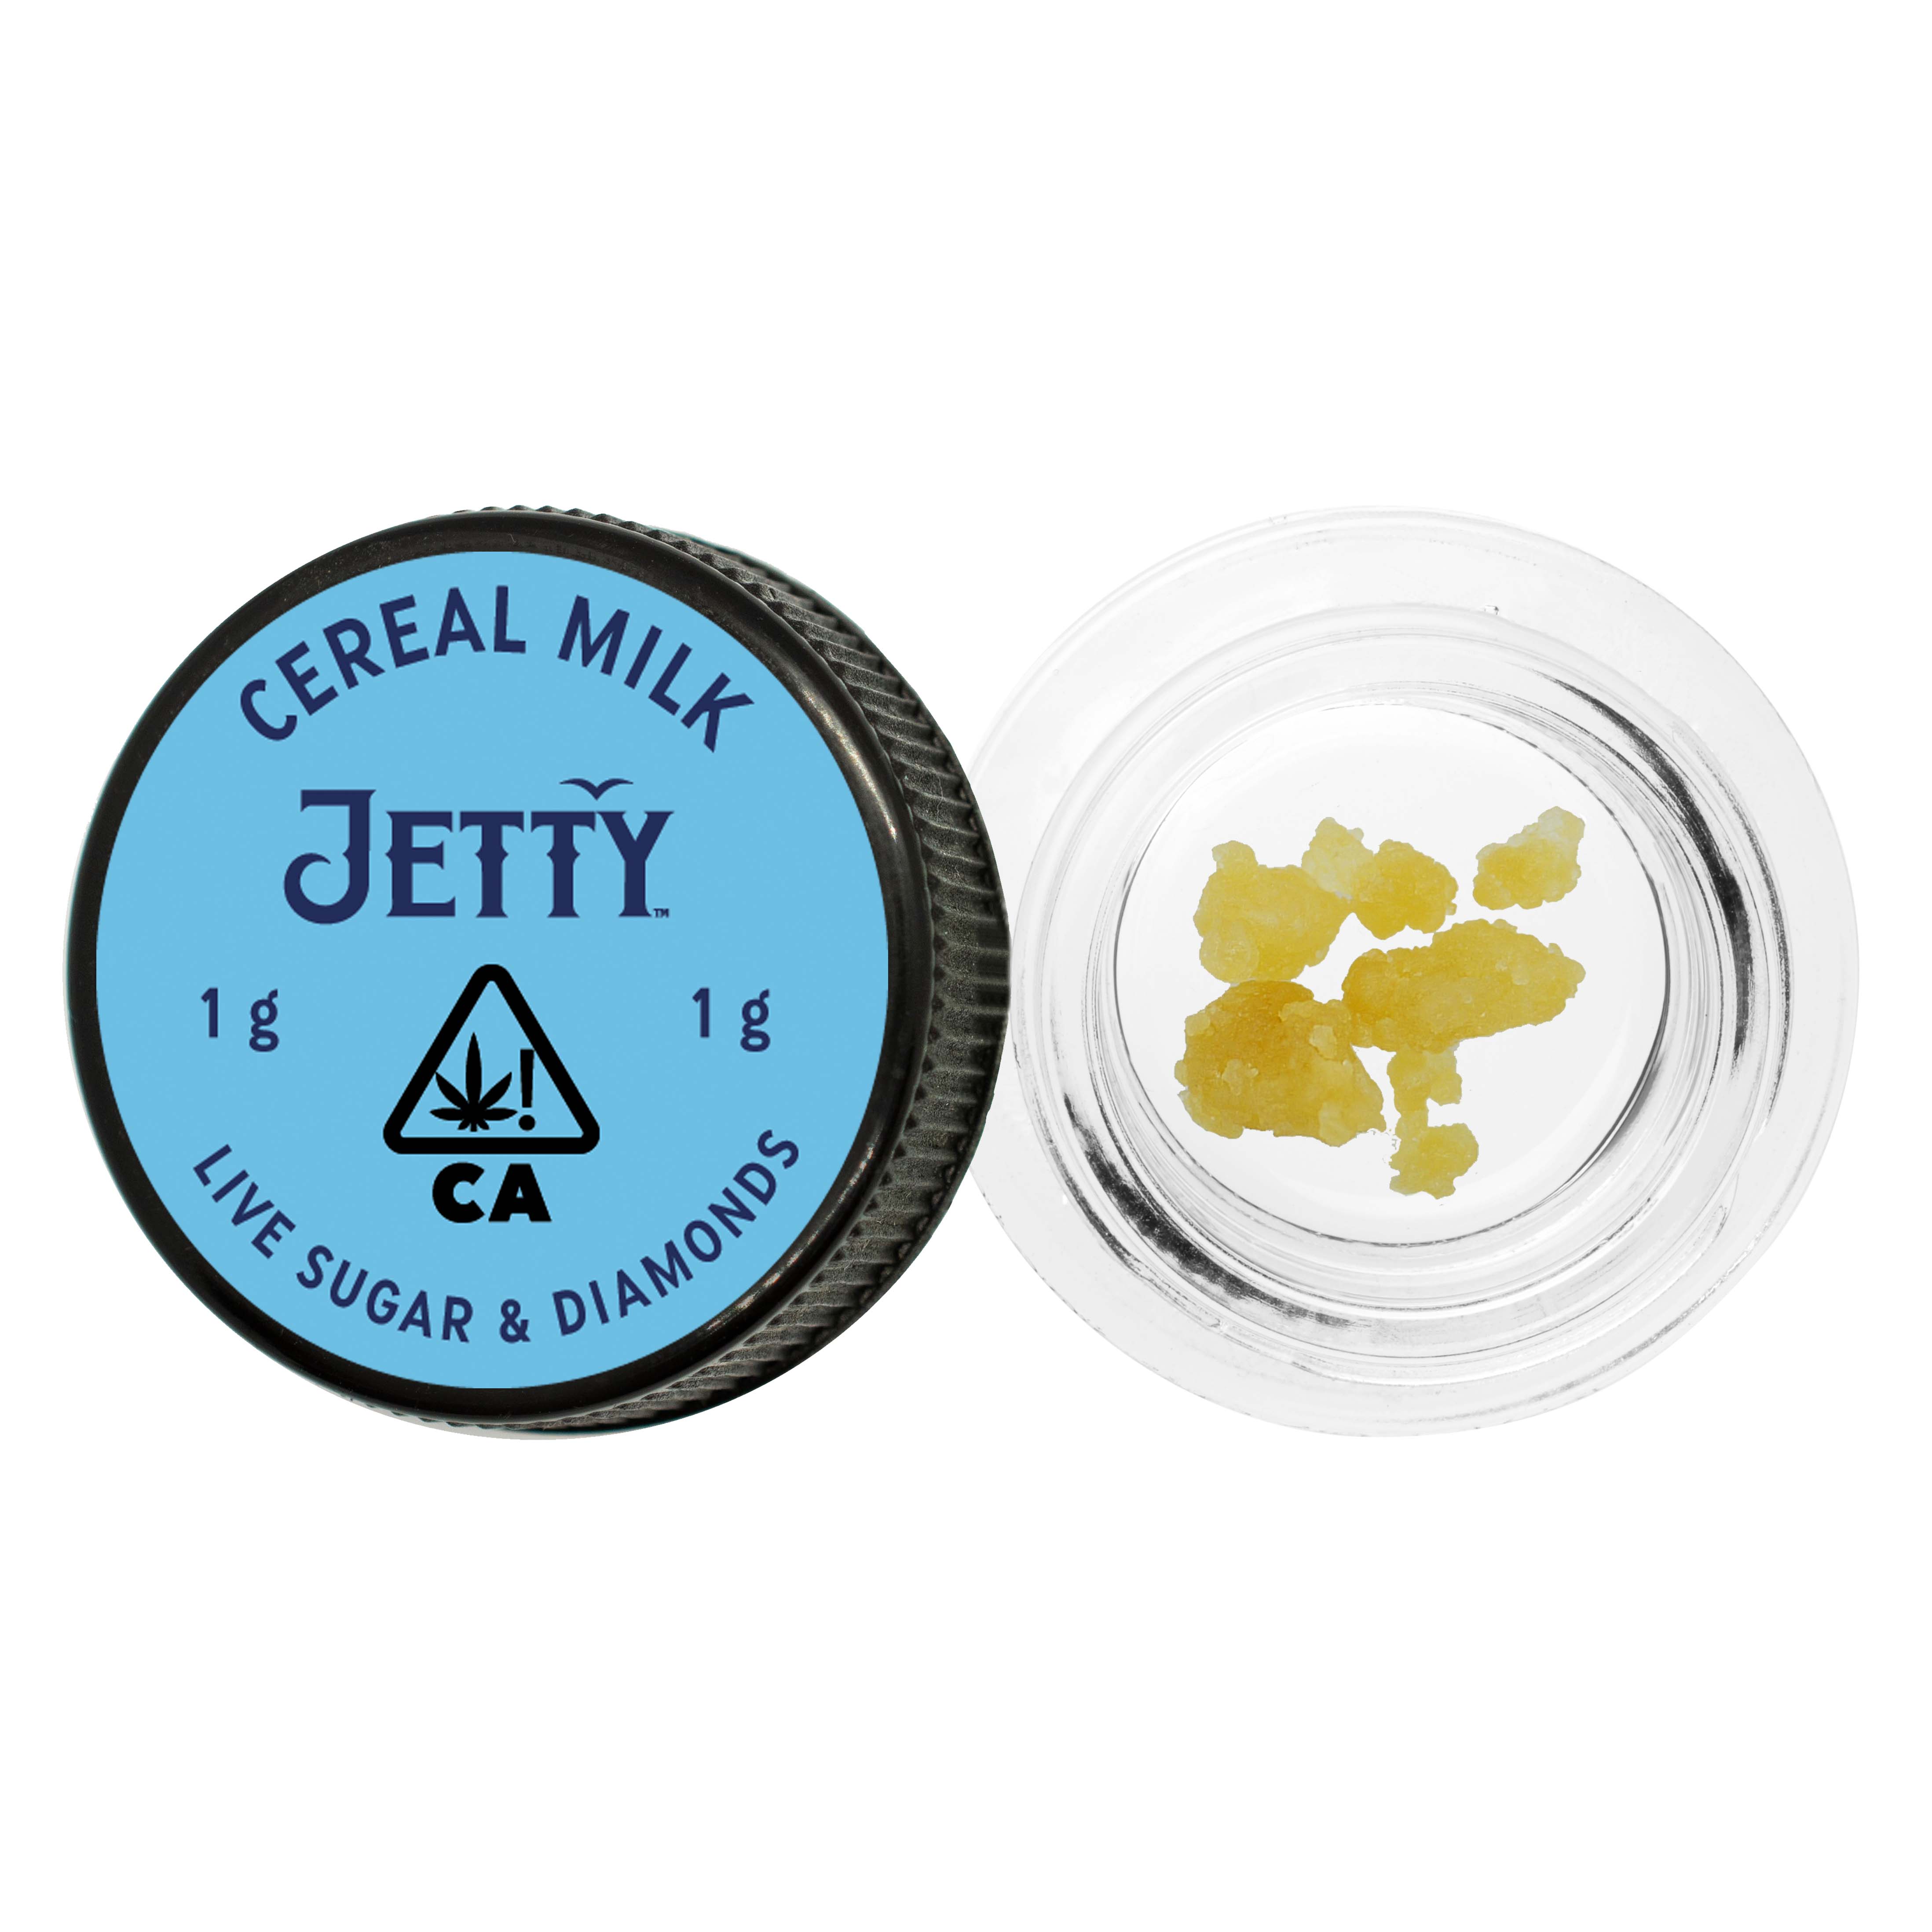 A photograph of Jetty Live Sugar and Diamonds 1g Cereal Milk